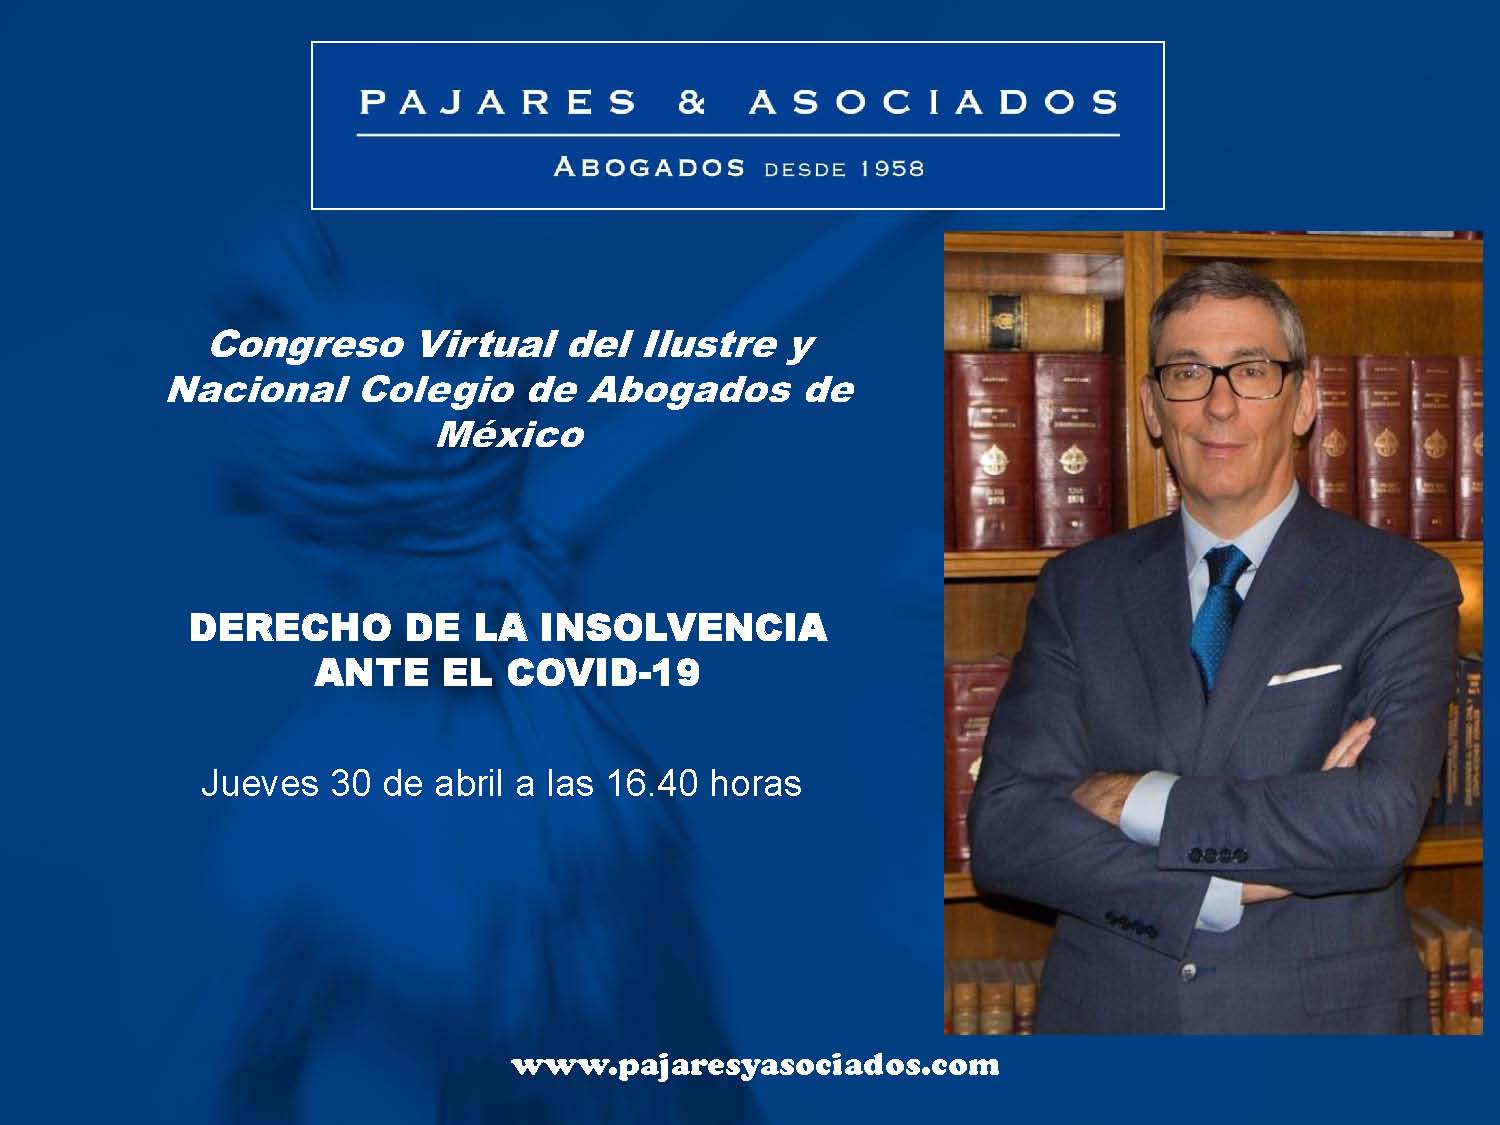 RIGHT OF INSOLVENCY BEFORE EL COVID-19